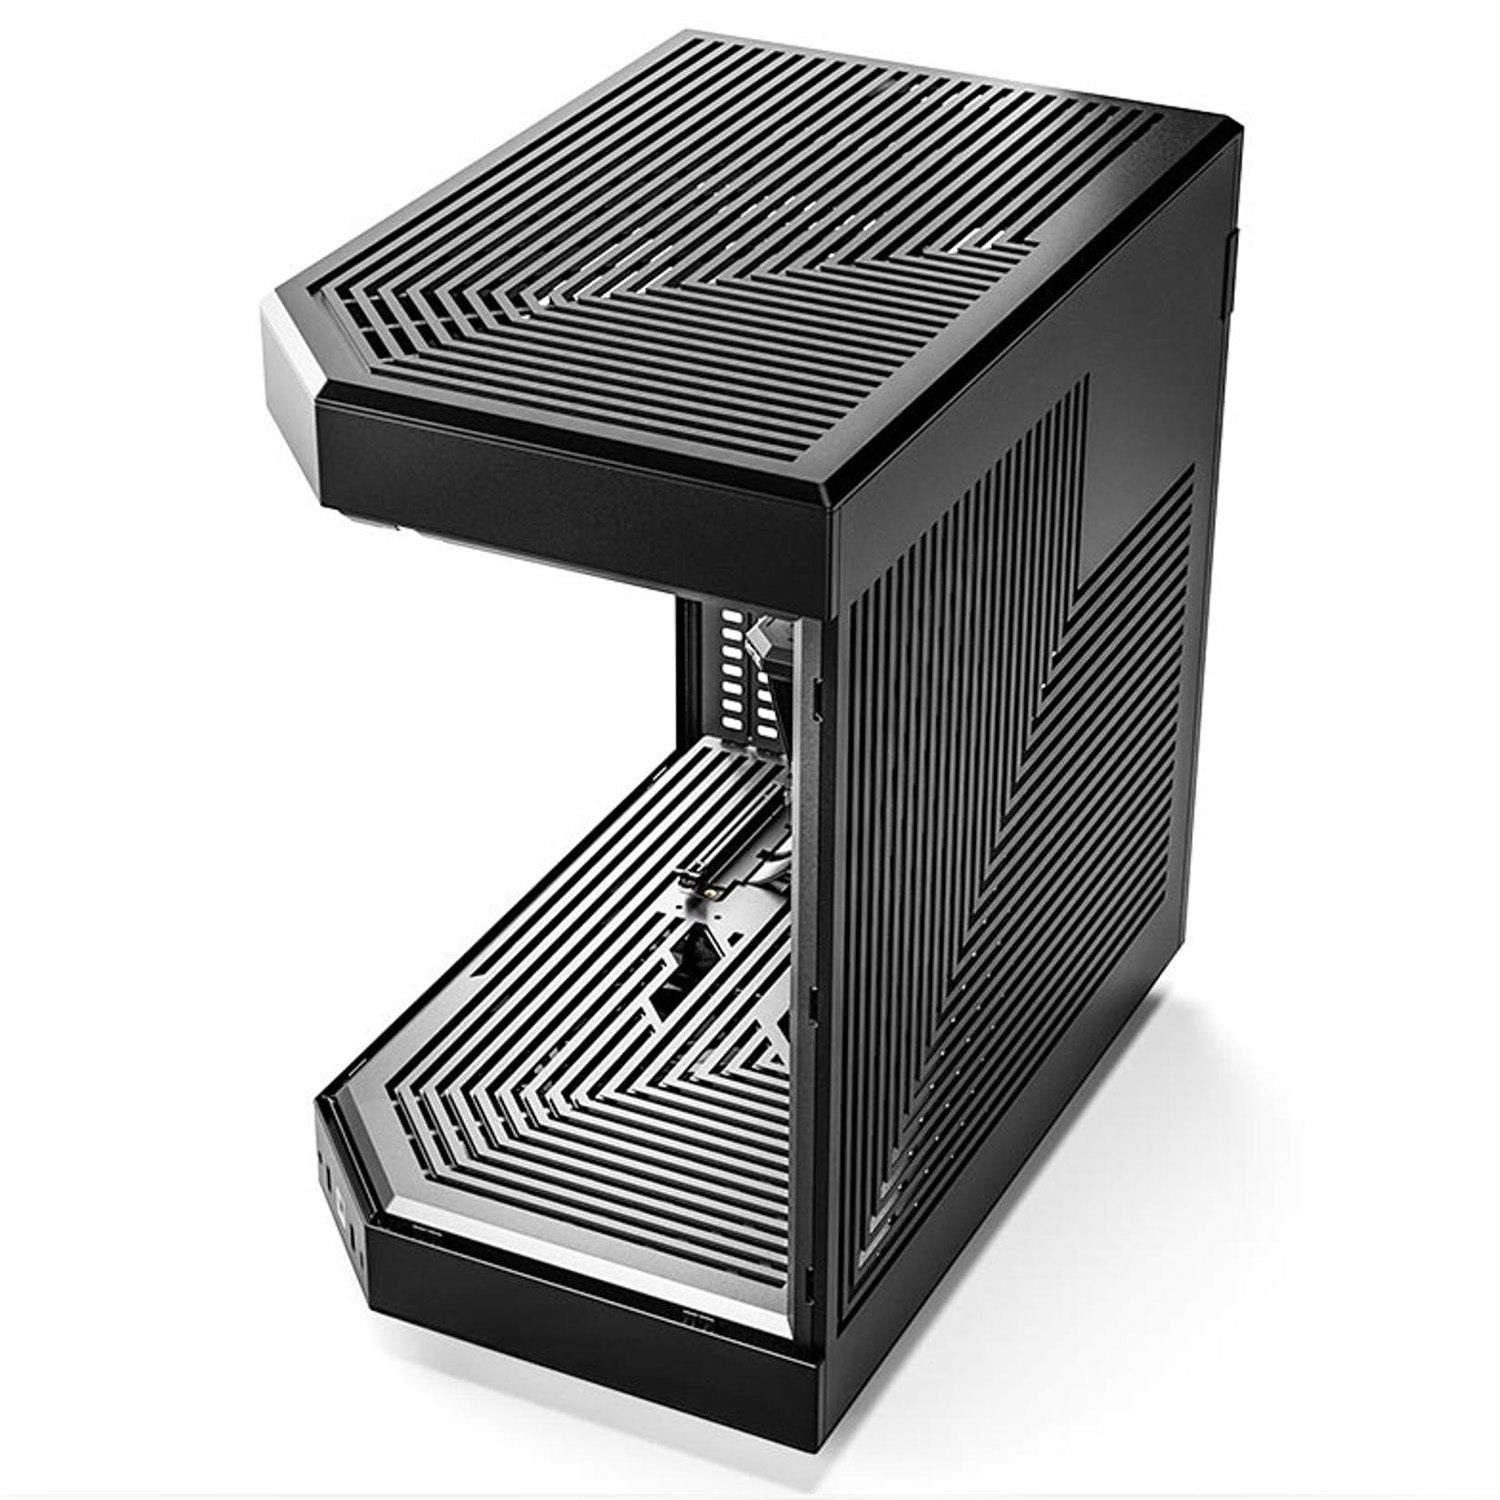 HYTE Y60 | ATX Tempered Glass Case (Black)